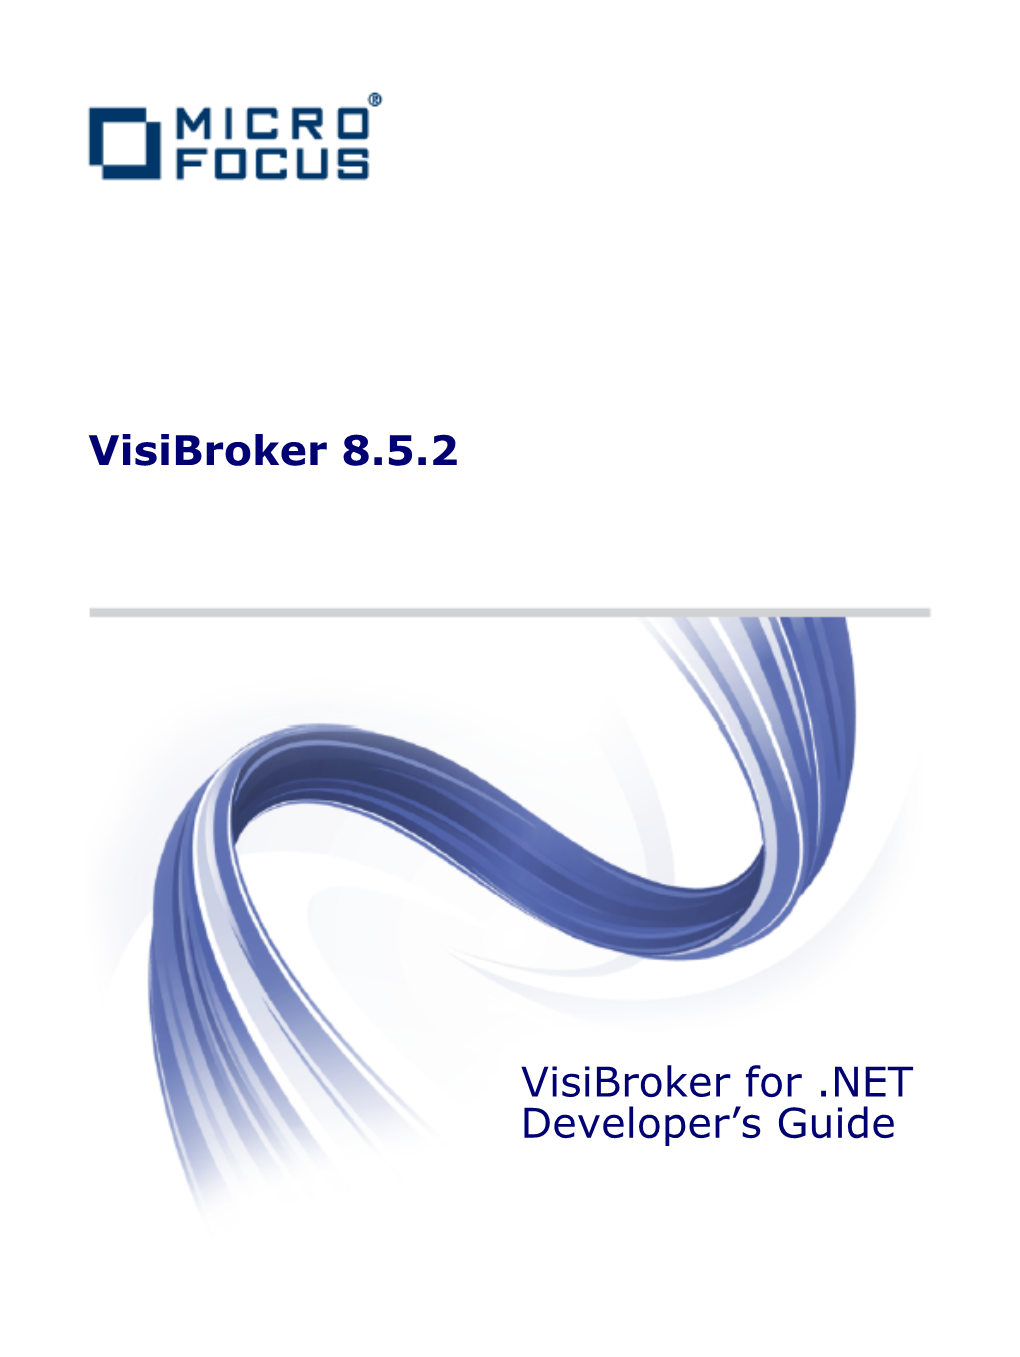 What Is Visibroker for .NET?